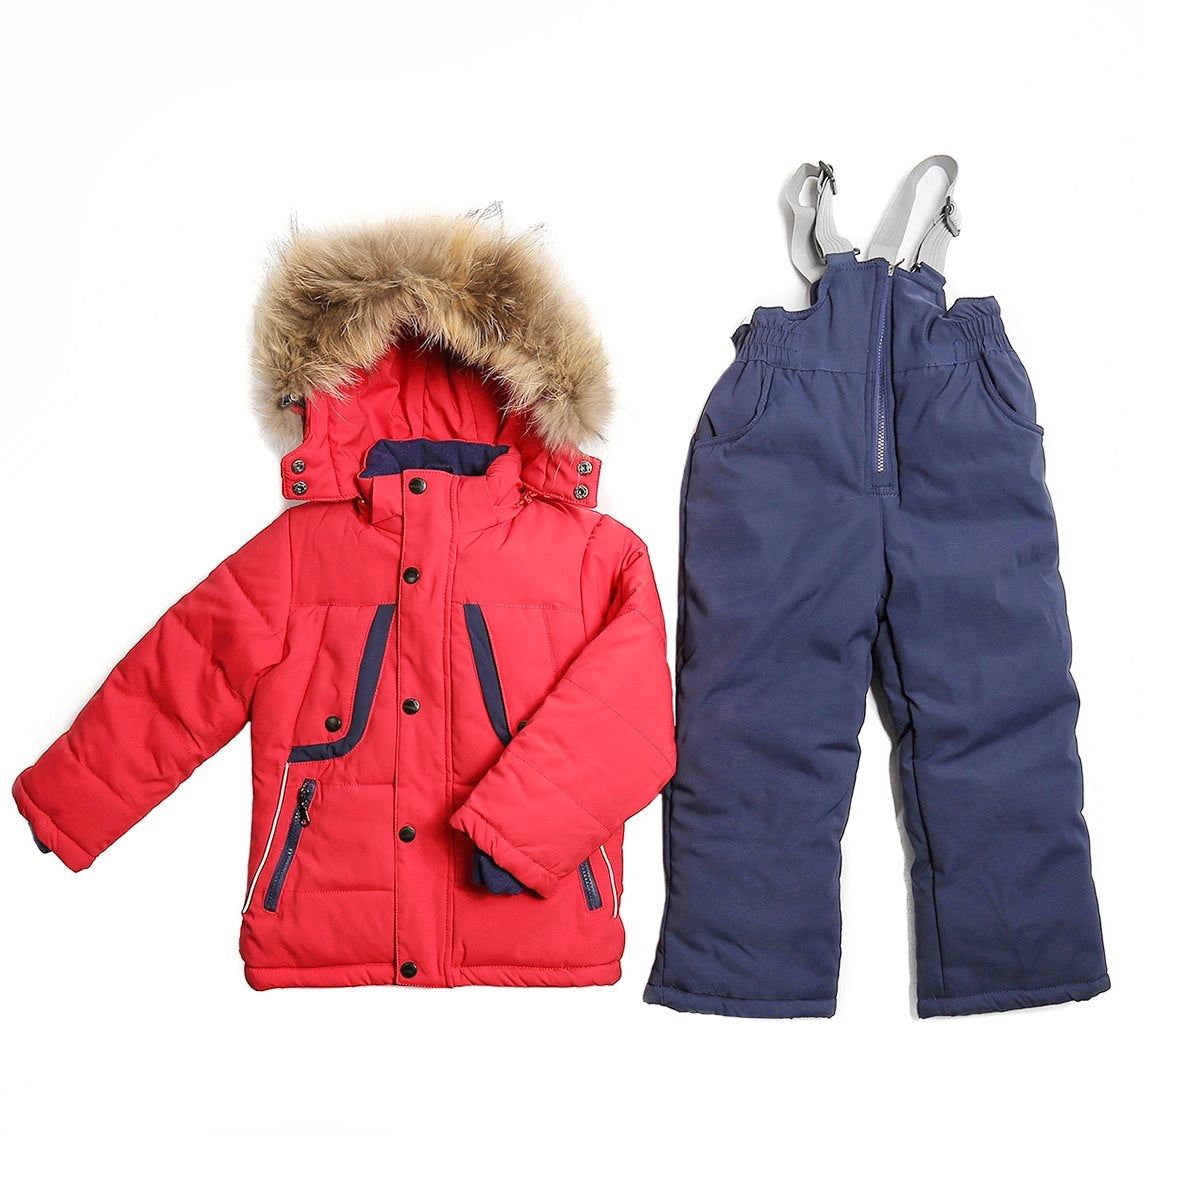 https://www.justbespec.shop/wp-content/uploads/1703/75/only-45-00-usd-for-toddler-boys-3-piece-winter-stylish-jacket-sheep-wool-vest-overall-red-set-2-years-online-at-the-shop_0.jpg